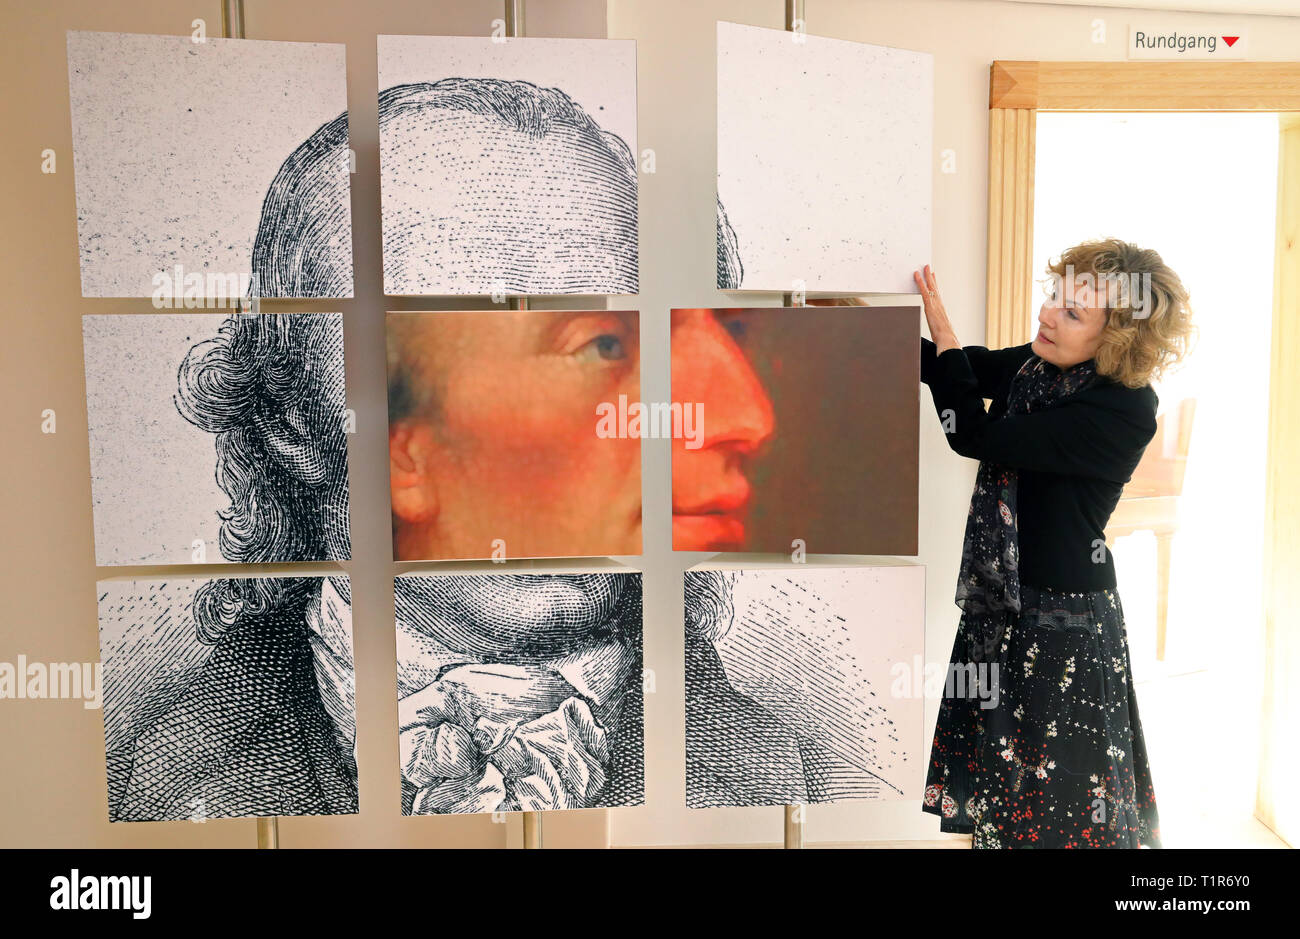 25 March 2019, Mecklenburg-Western Pomerania, Penzlin: In the exhibition 'Johann Heinrich Voß. A Greek from Mecklenburg' in the future Literaturhaus shows Andrea Rudolph, director, a pictorial play of nine parts showing the poet in different views. The rebuilt and extended town school, in which Johann Heinrich Voss (1751-1826) learned from 1759-1766, is opened on 29.03.2019 as a literary house for the Homer translator. The most famous son of the city became known as a poet especially with translations of the 'Odyssey' and the 'Iliad', to which also the legend about the conquest of the ancient Stock Photo